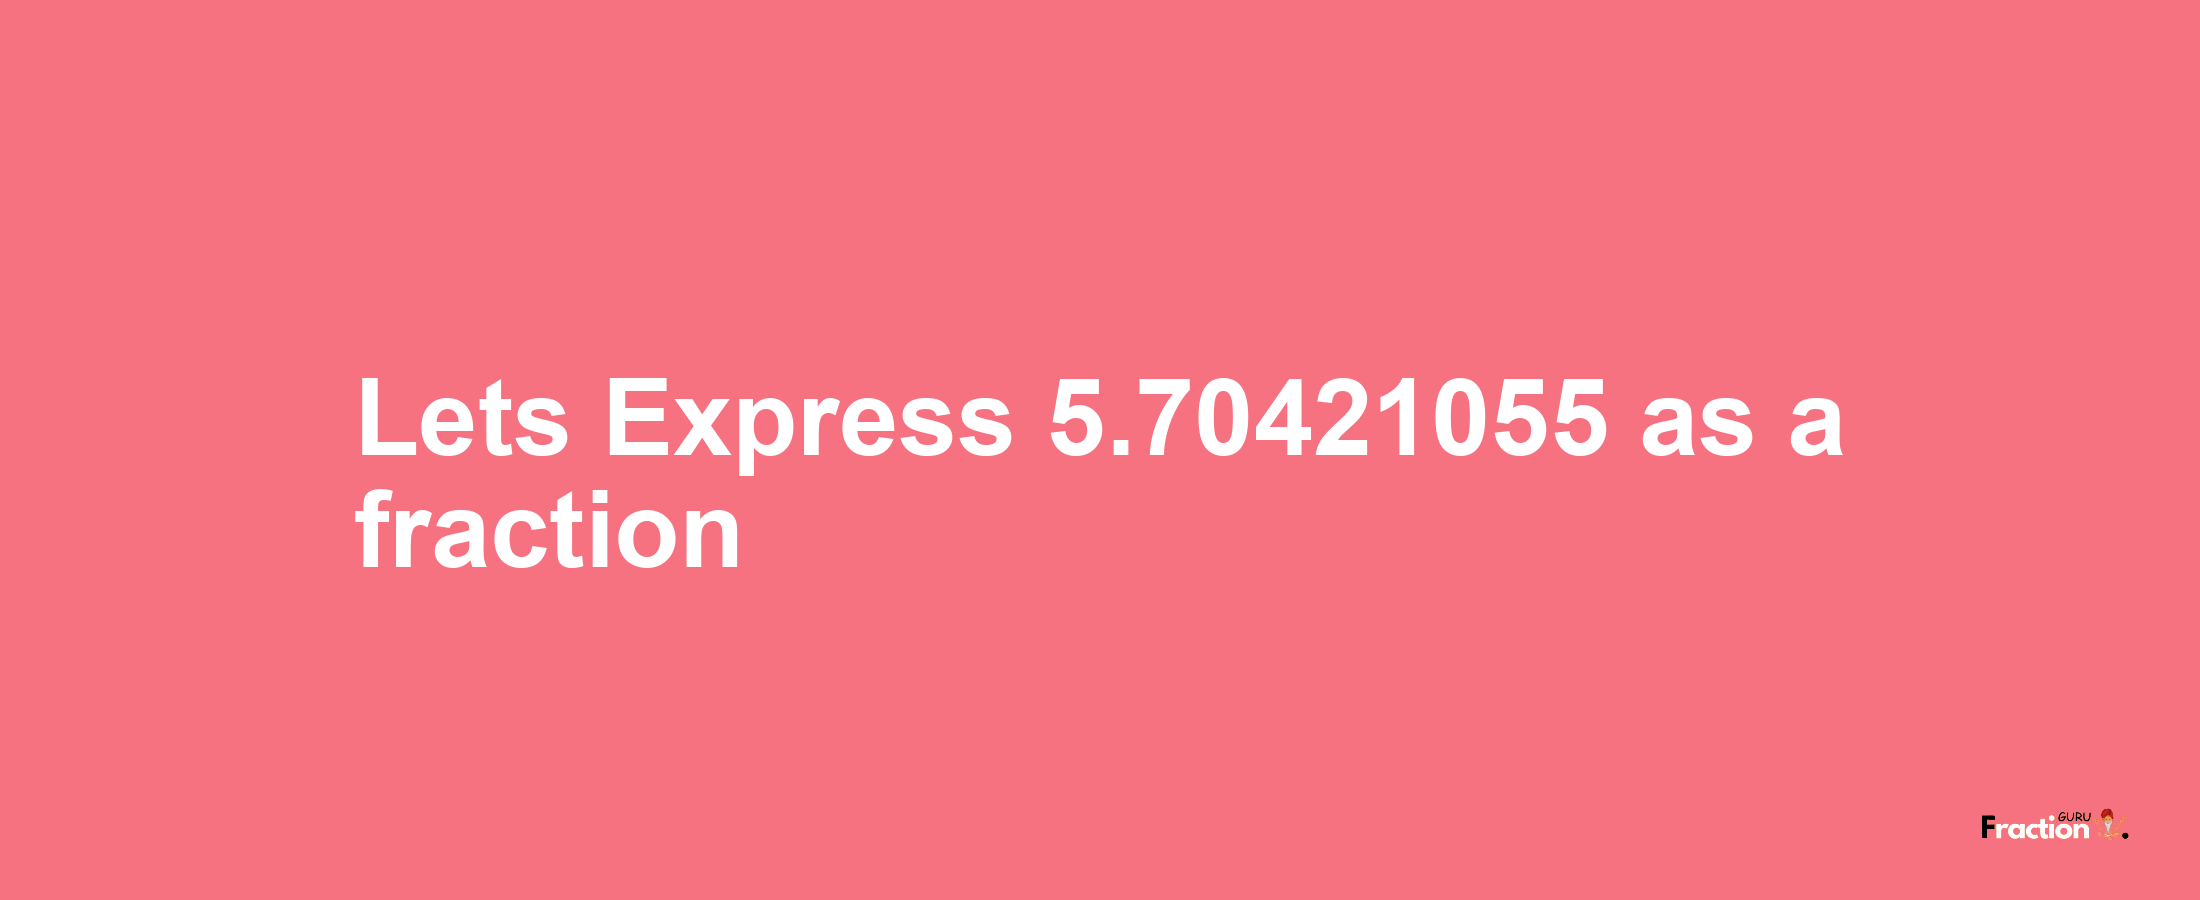 Lets Express 5.70421055 as afraction